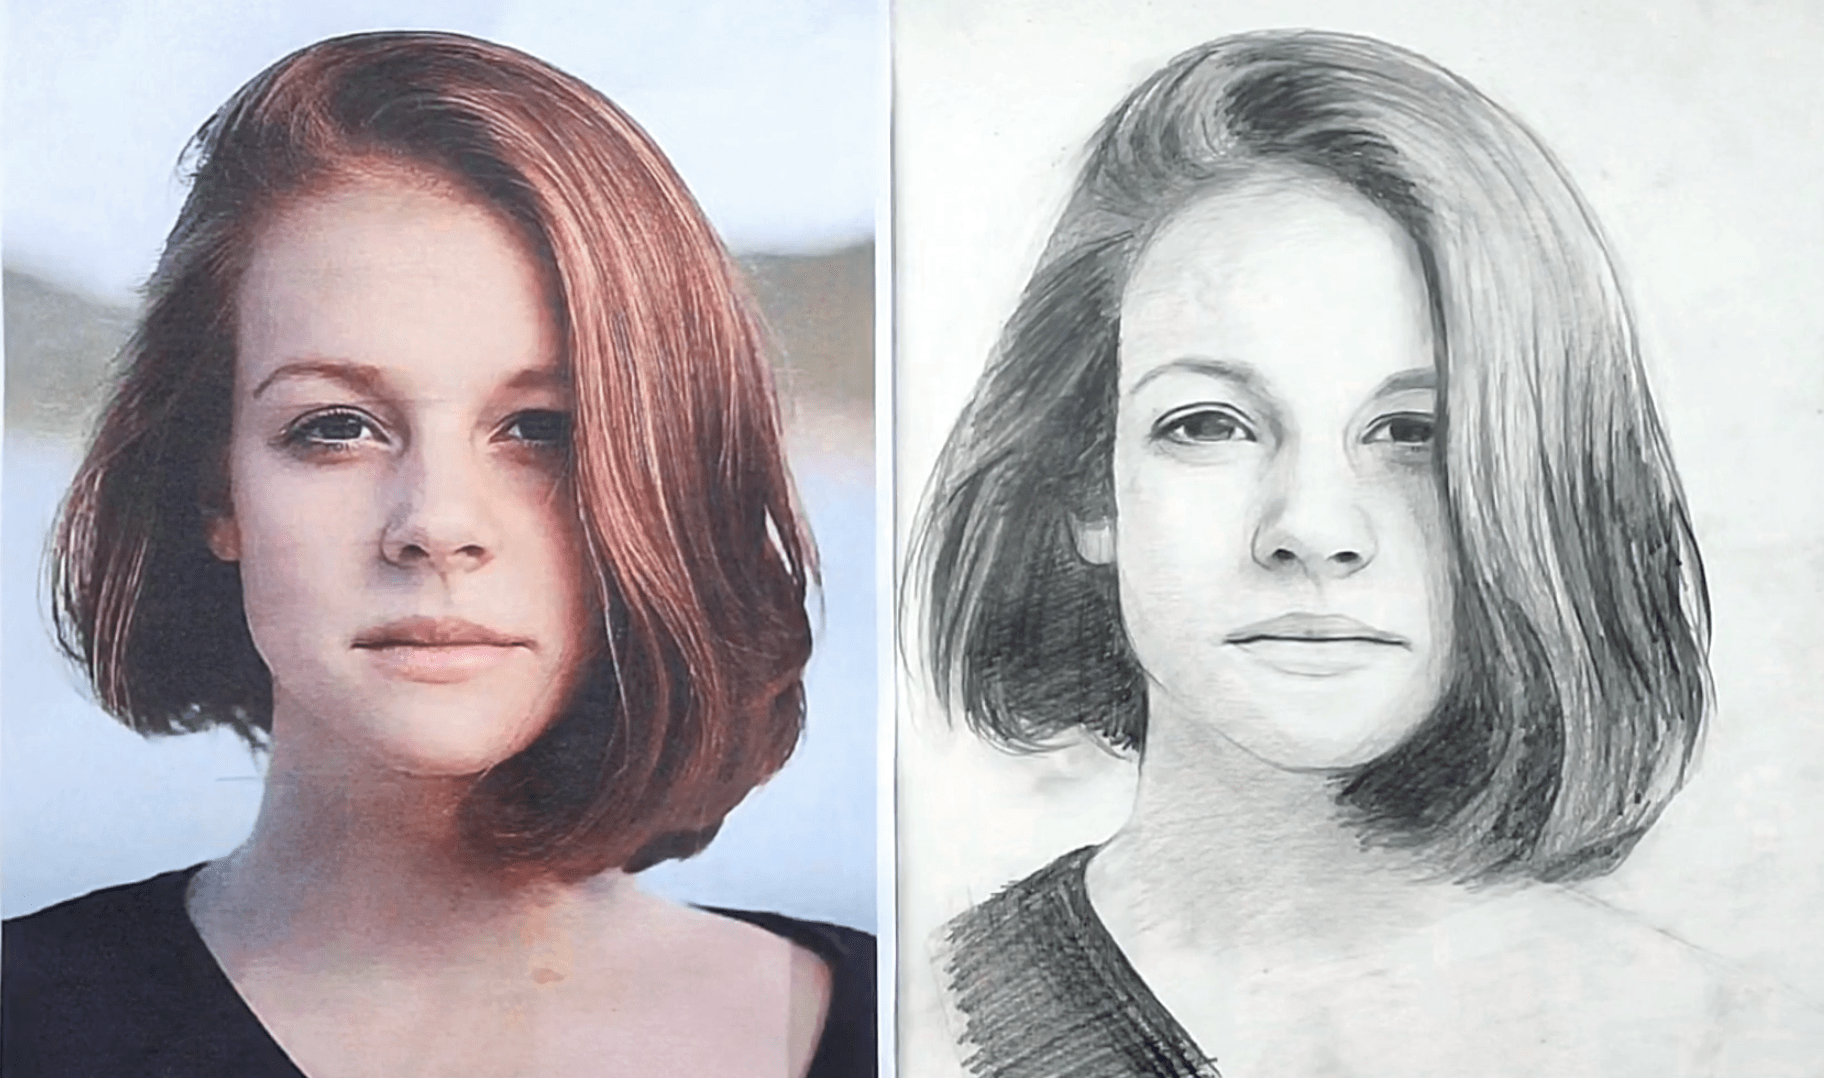 Pencil Sketch for beginners, How to draw a face - step by step